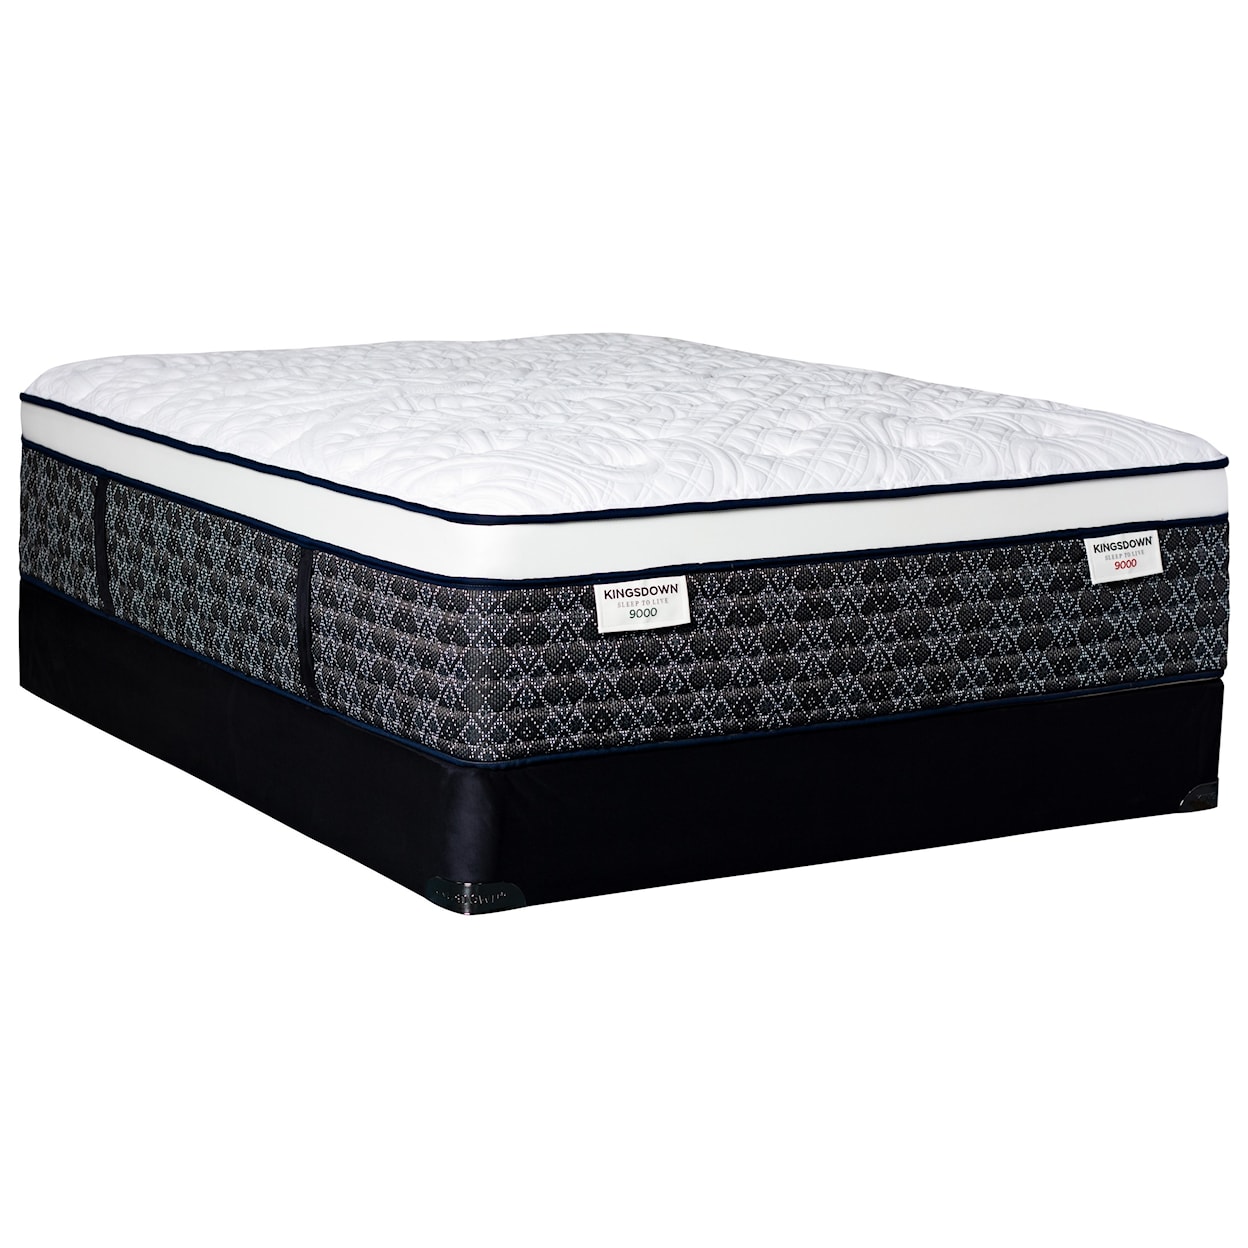 Kingsdown Sleep to Live 9000 Green Red ET King Pocketed Coil Mattress Set